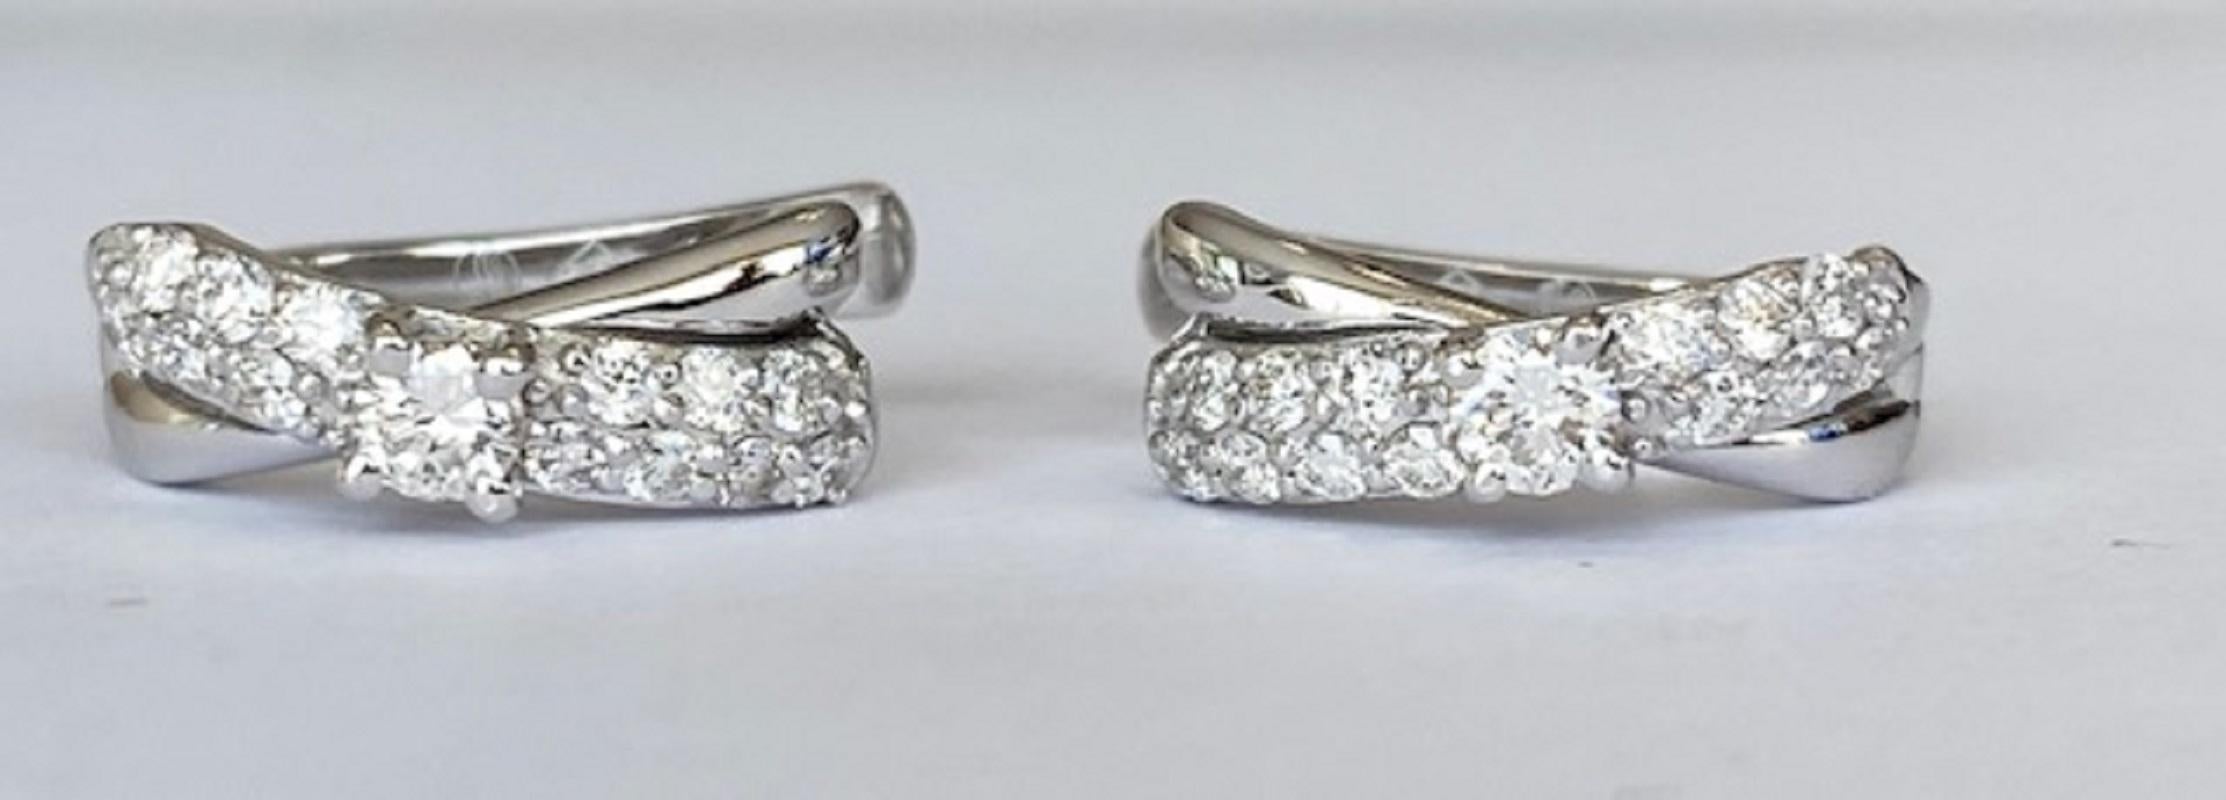 Offered in excellent condition, 18 karat white gold creole earrings with 2 brilliant cut diamonds in total approx. 0.20 ct G/VS and set on the sides with 26 brilliant cut diamonds approx. 0.40 ct of G/VS quality in total. Total 0.60 ct G/VS.
Length